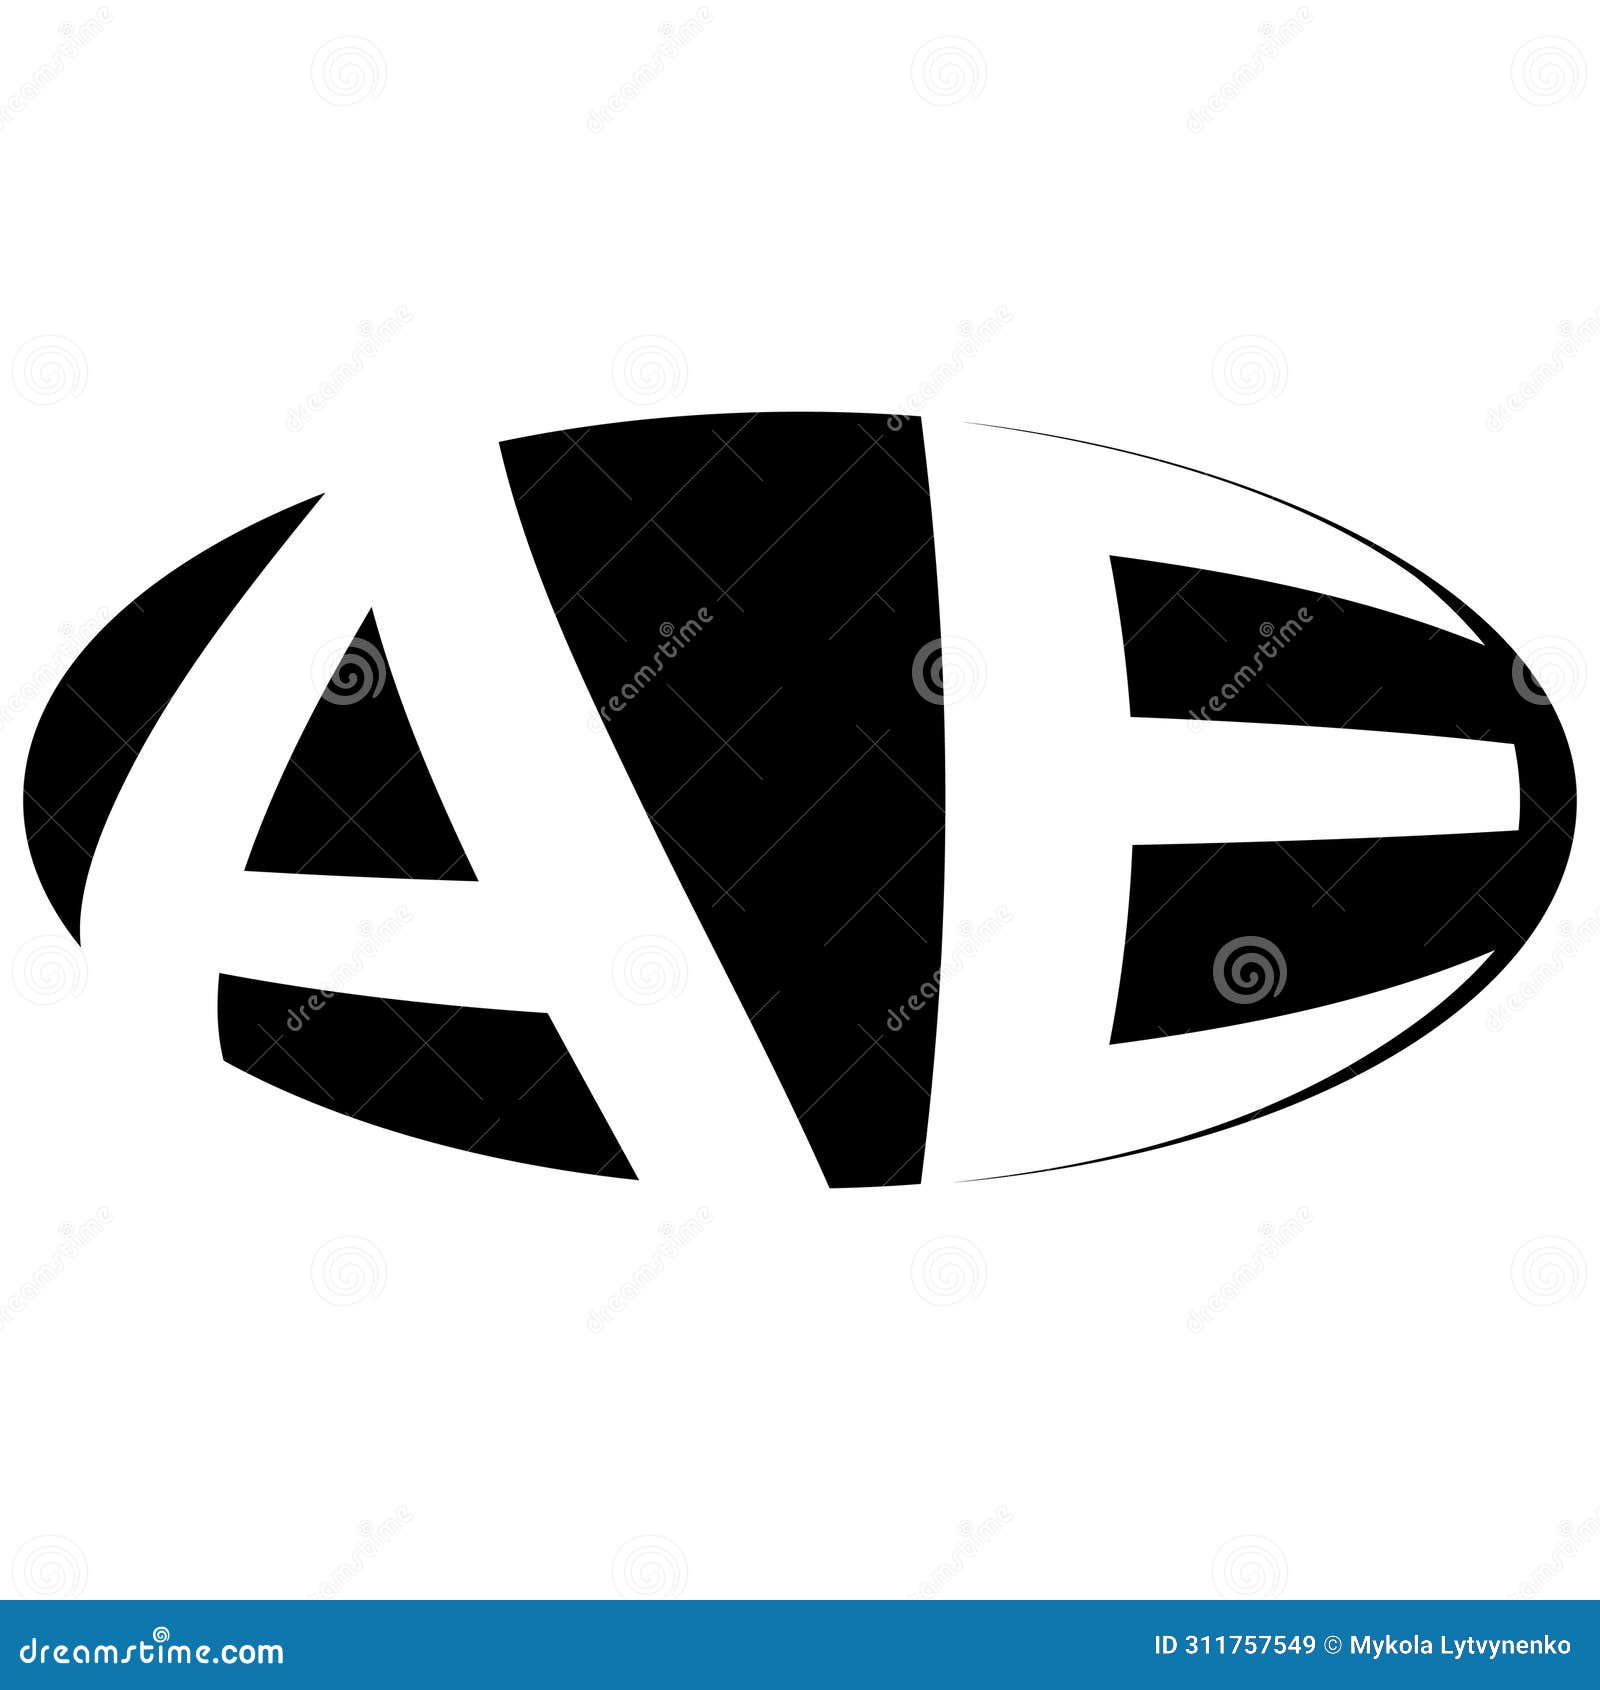 oval logo double letter a e two letters ae ea